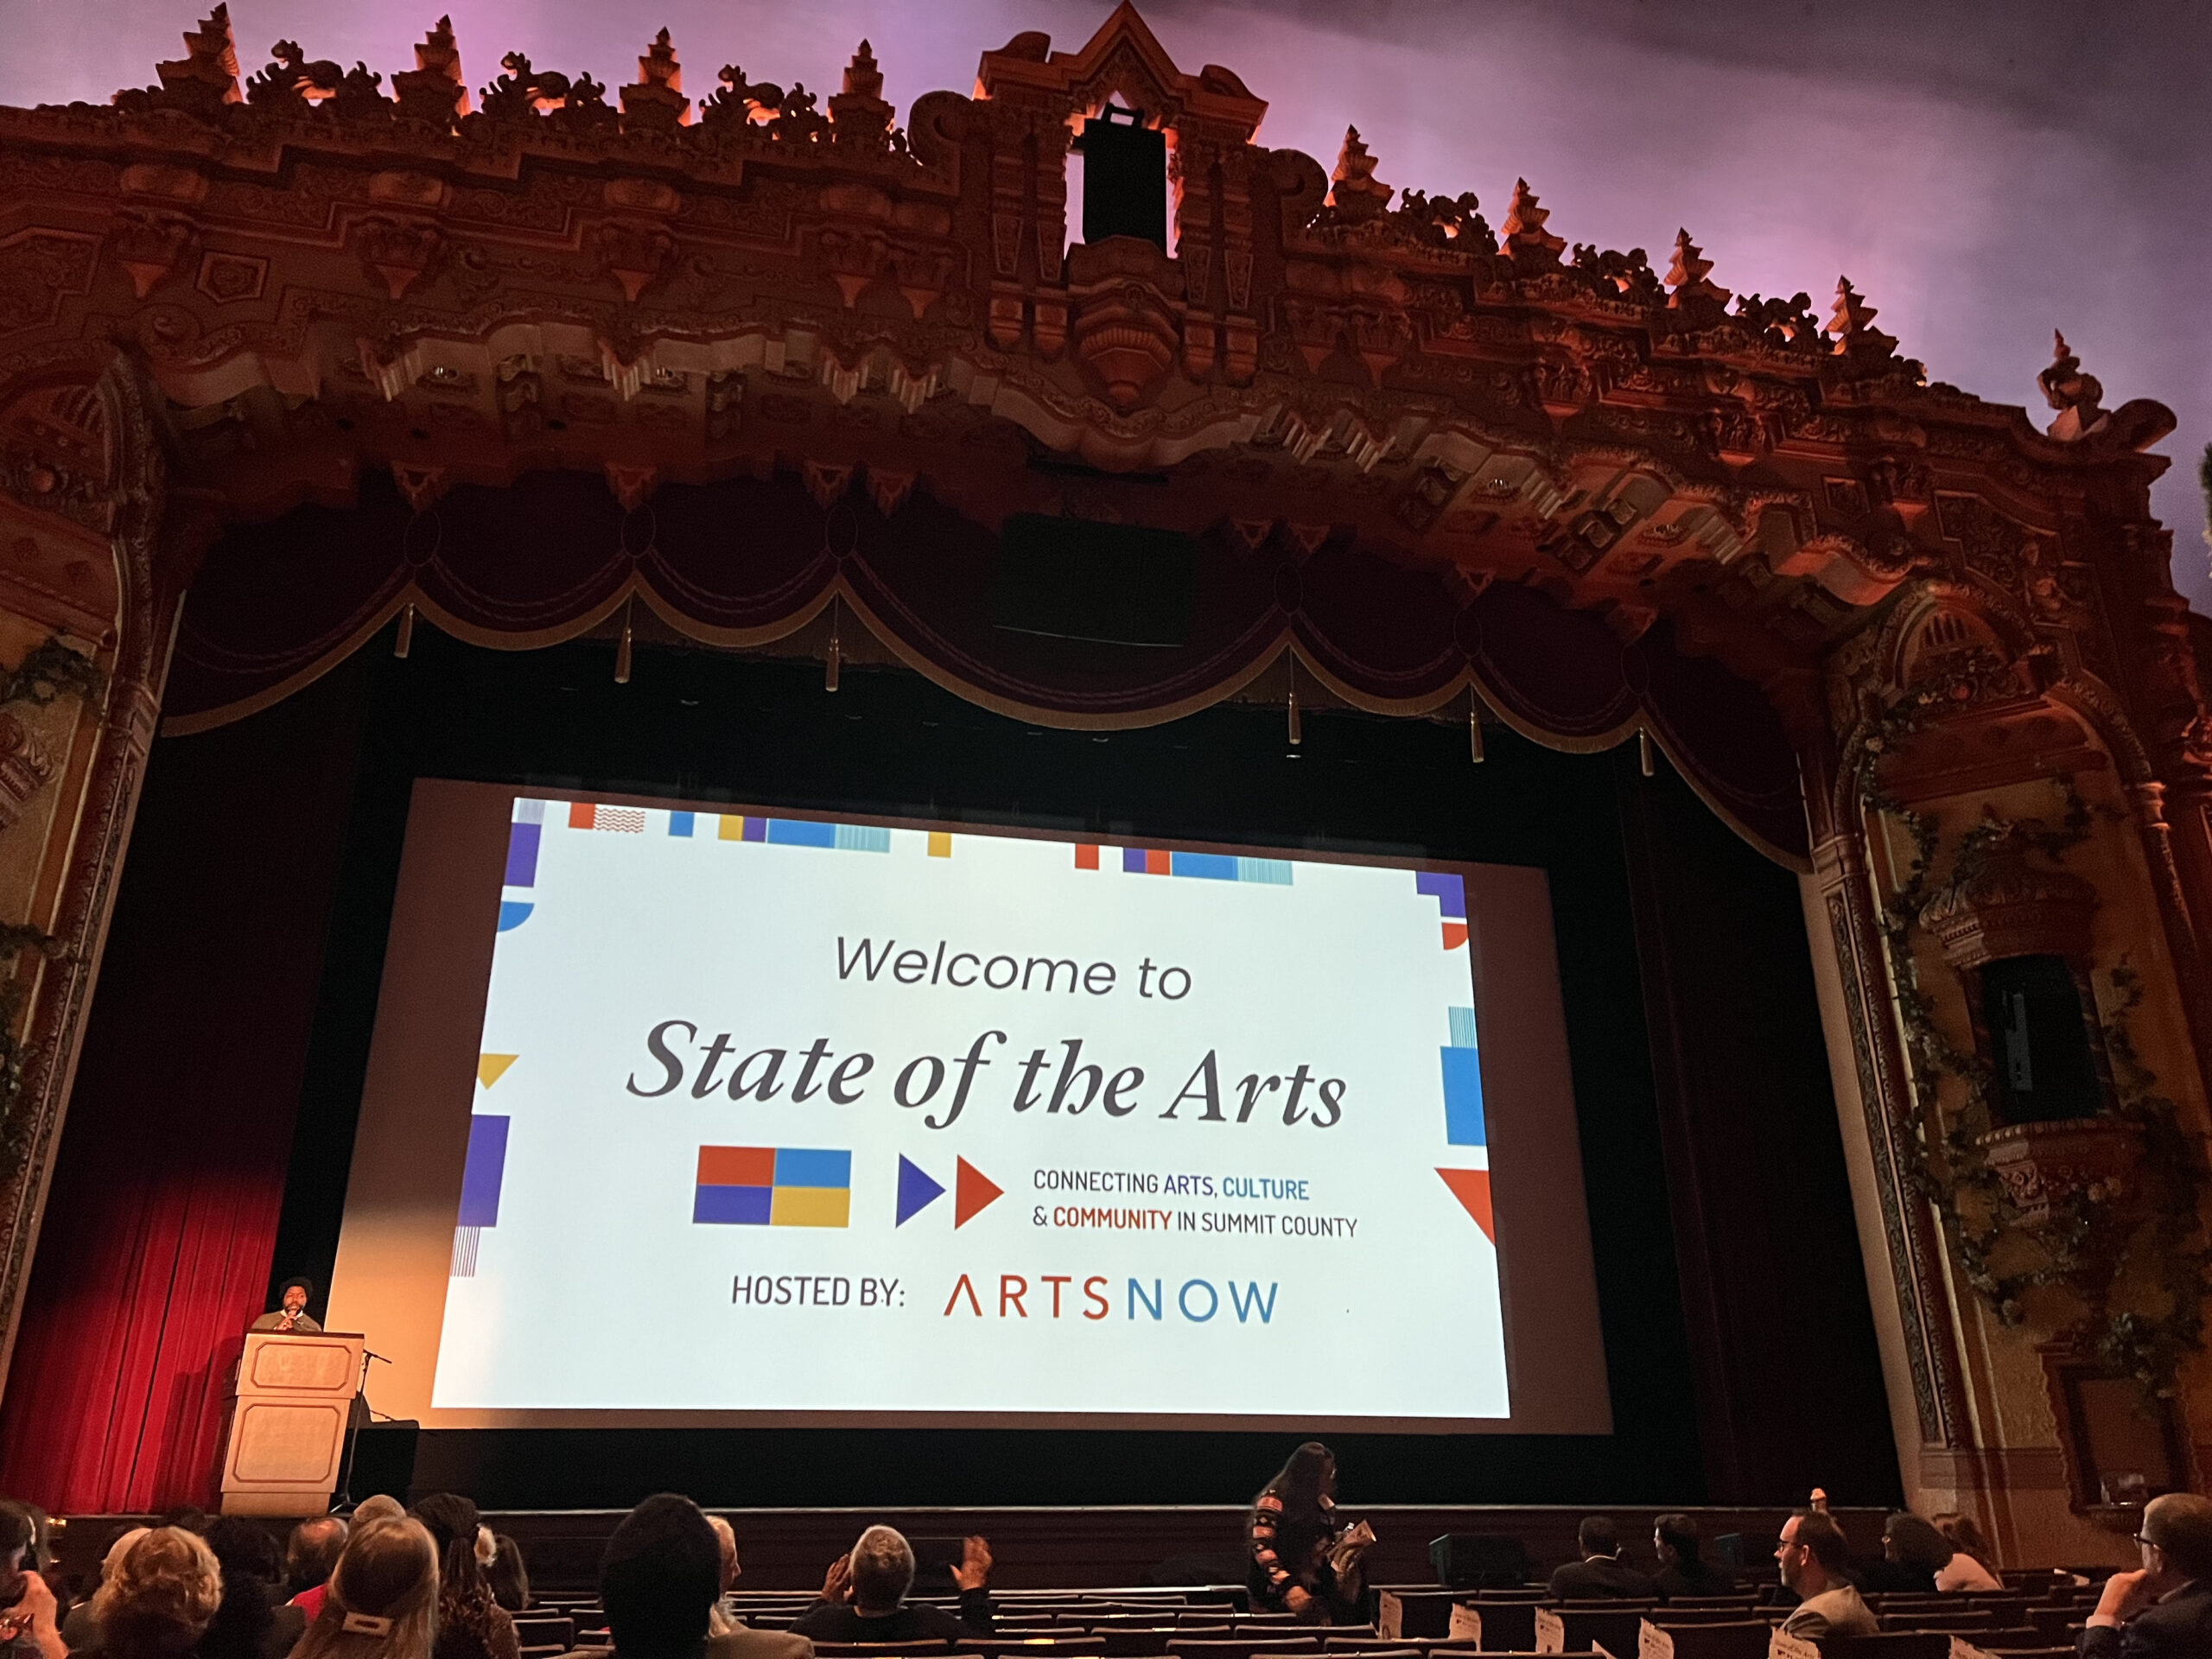 Thumbnail image for: STATE OF THE ARTS 2022: SUMMIT COUNTY’S HIGHLIGHT REEL